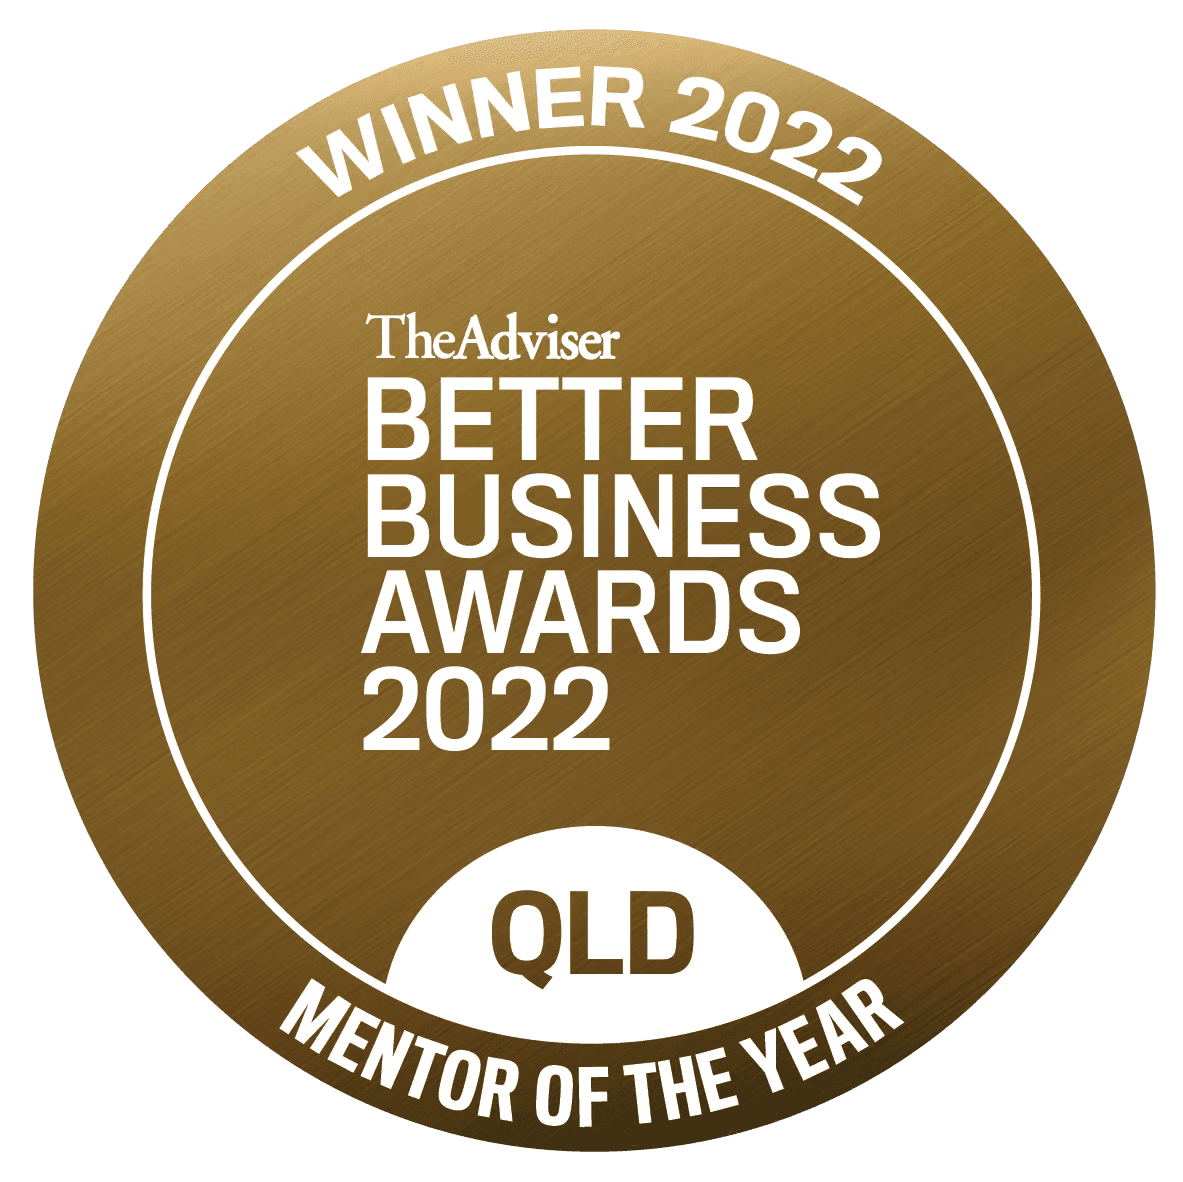 Smart Mortgage Corp  - 2022 The Adviser Better Business Awards - Mentor of the year - Winner